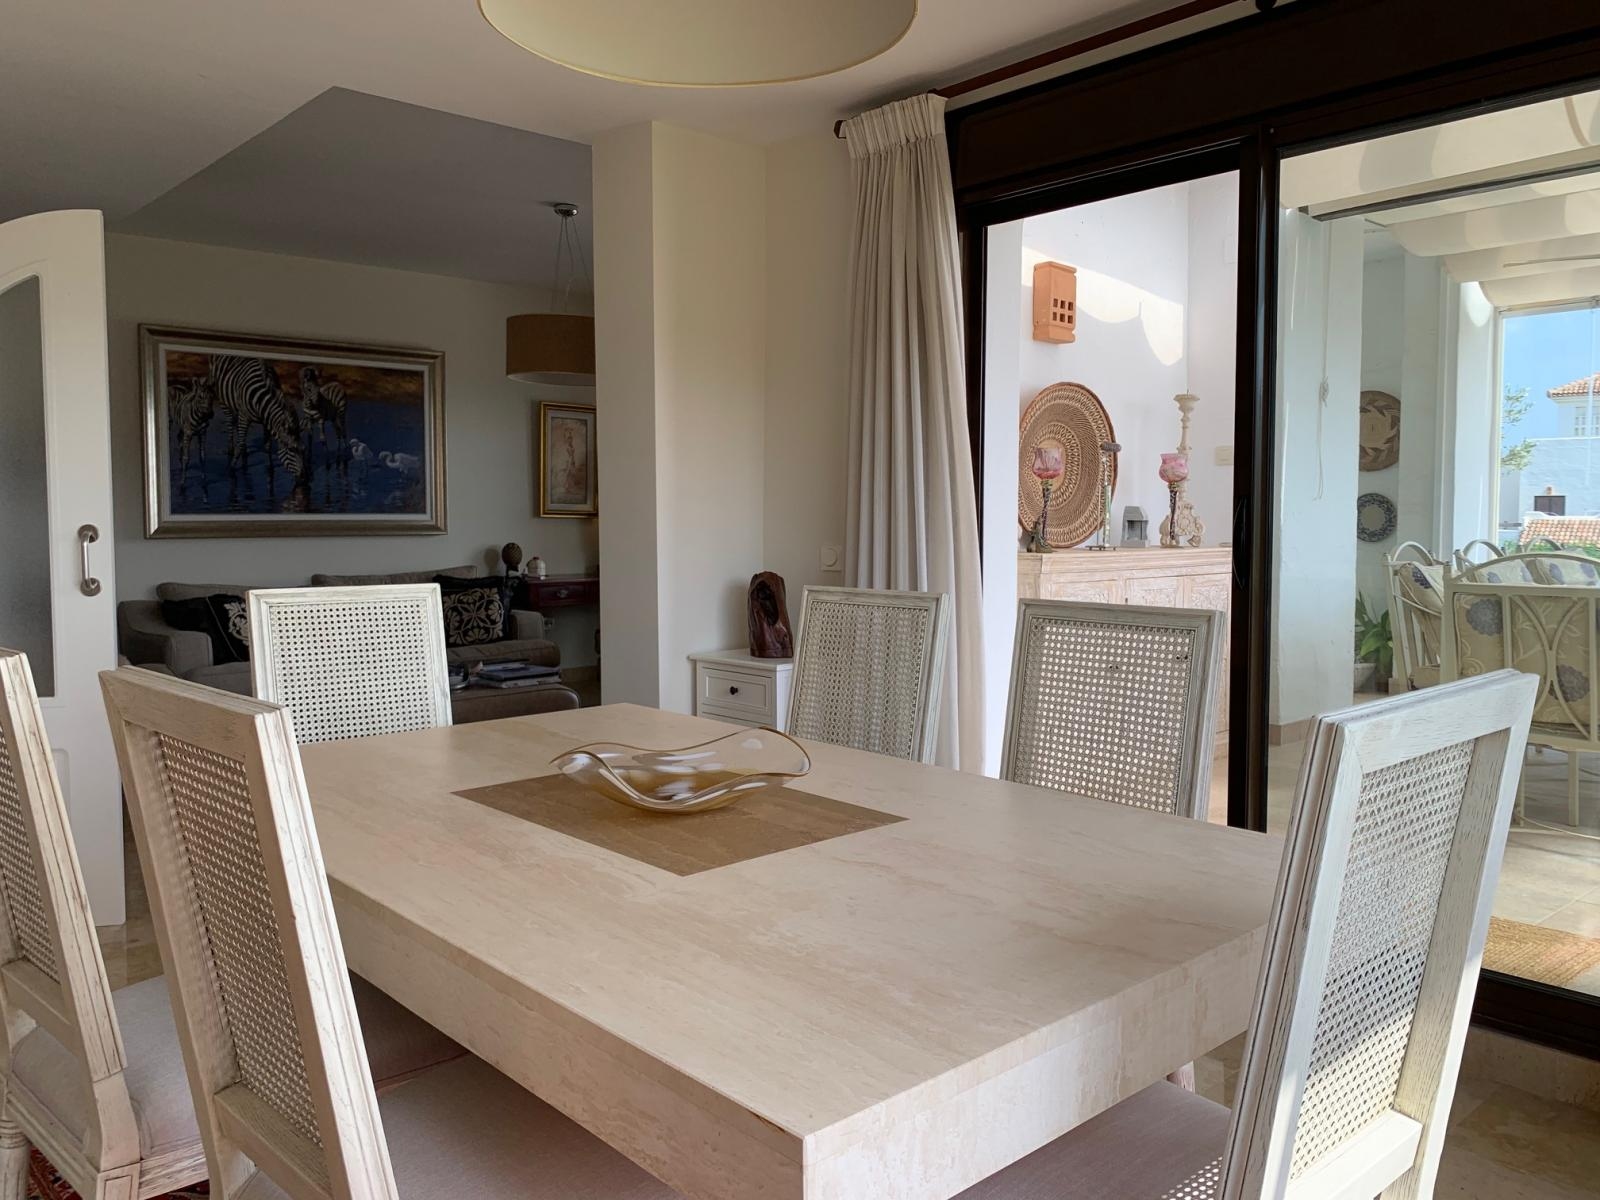 Splendid semi-detached house with spectacular views in Alcaidesa